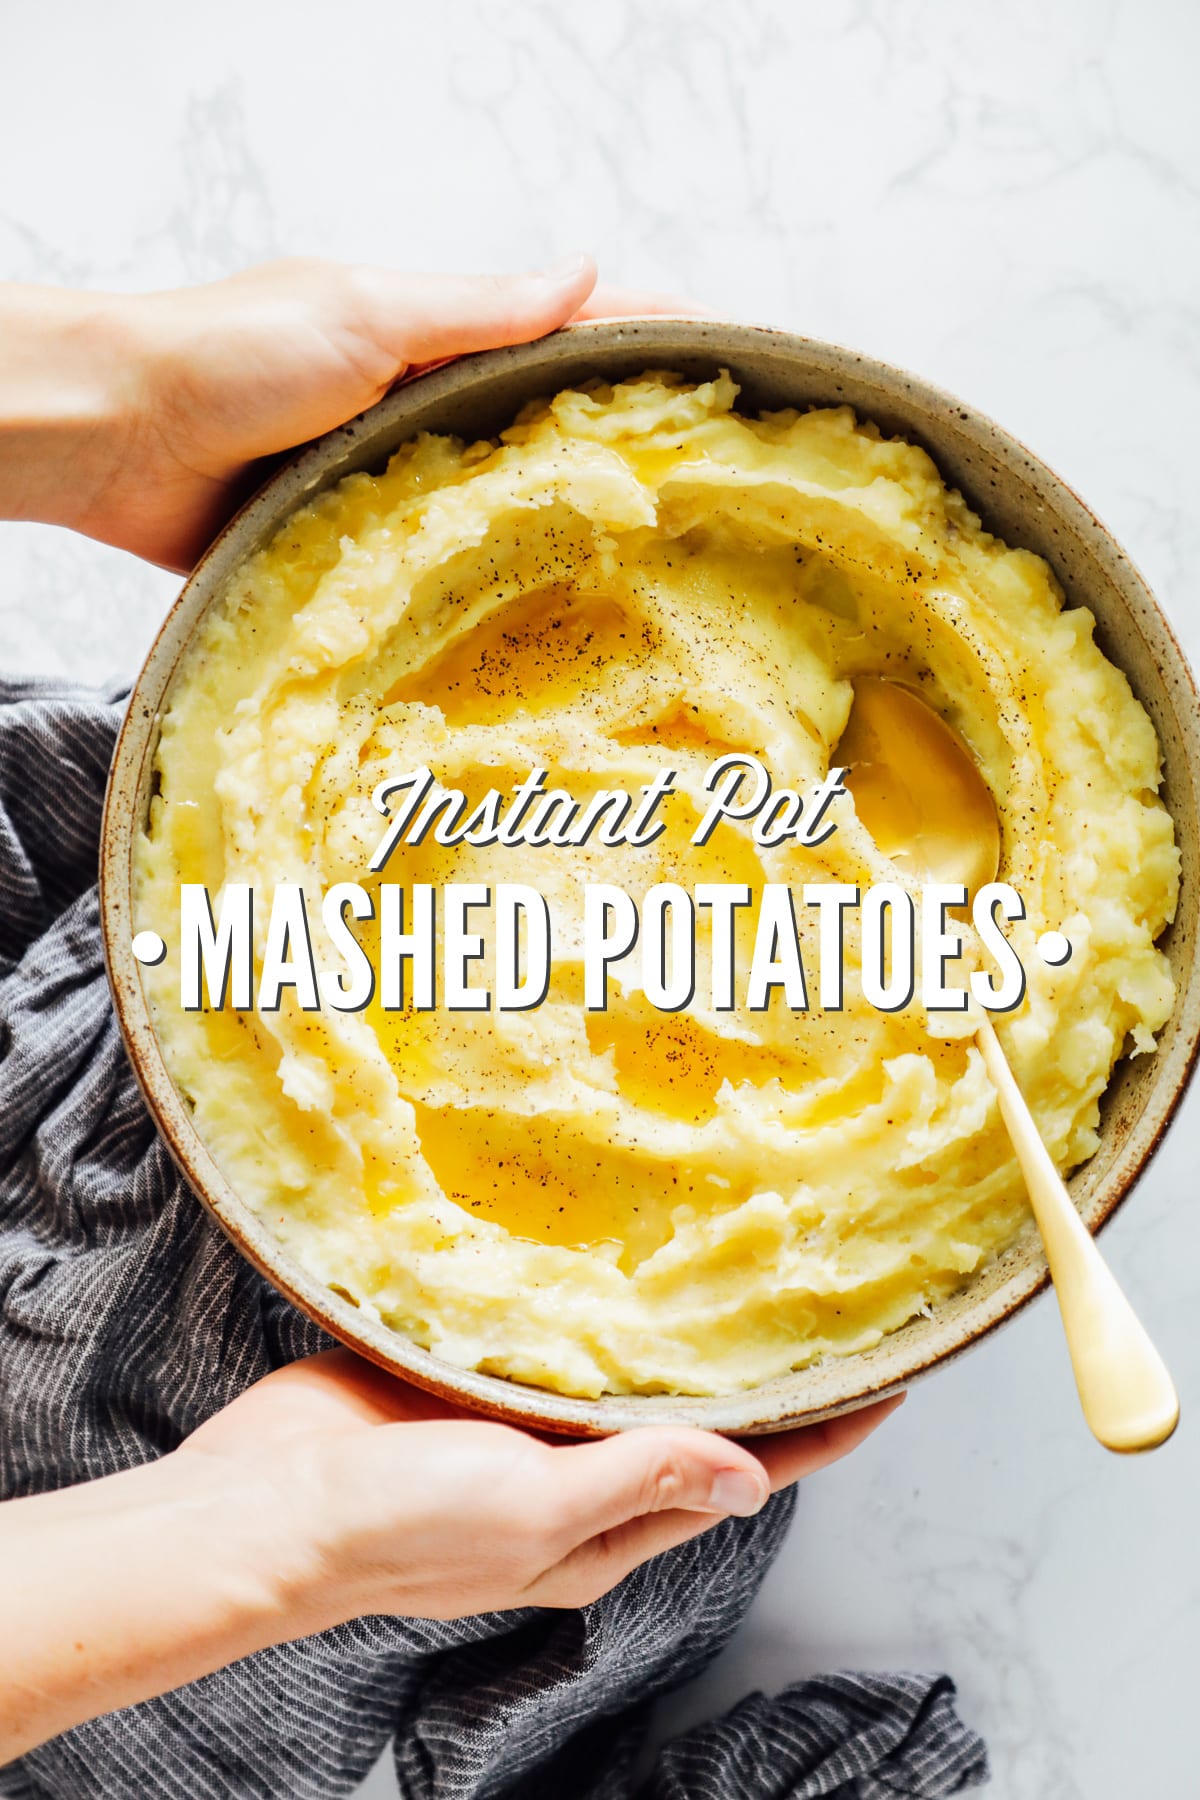 4-Ingredient Instant Pot Mashed Potatoes (No-Drain, Pressure Cooker Recipe): The Easiest Mashed Potatoes You’ll Ever Make